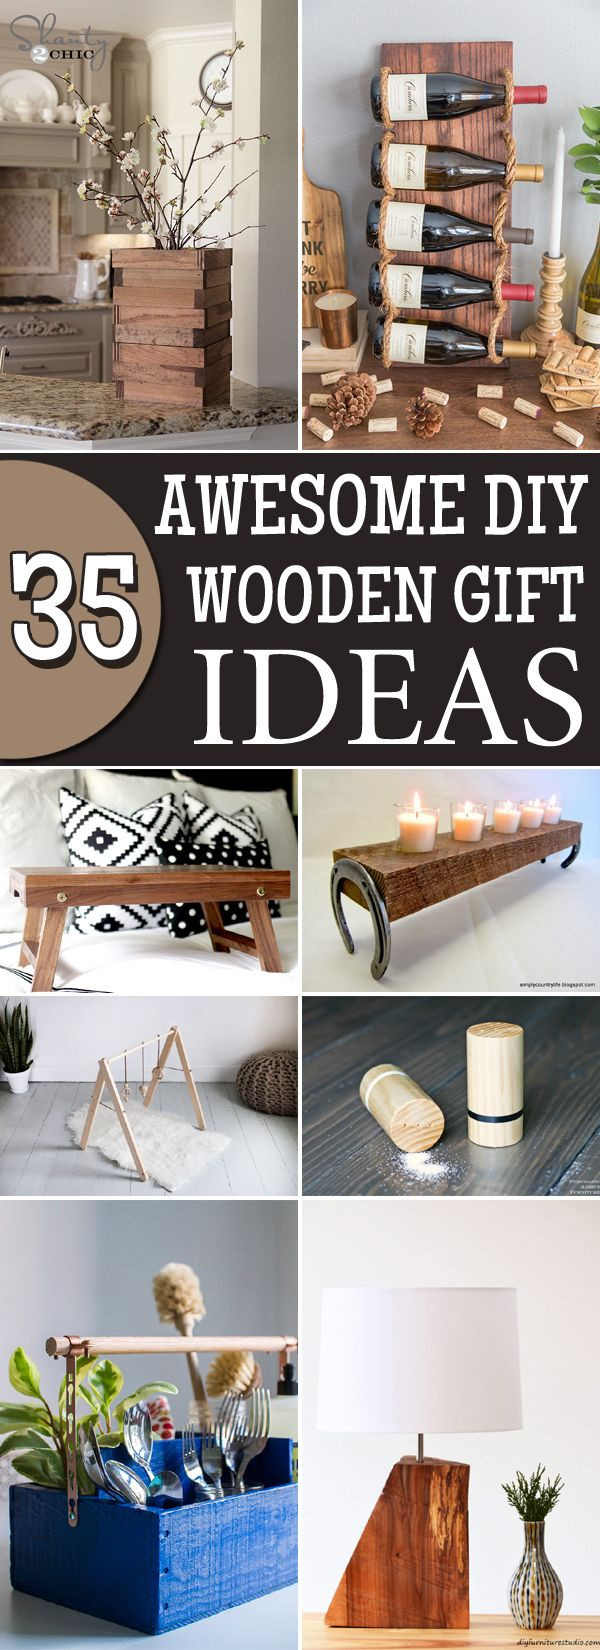 Wood Crafting Gifts
 35 Simple Gifts You Can Make From Wood